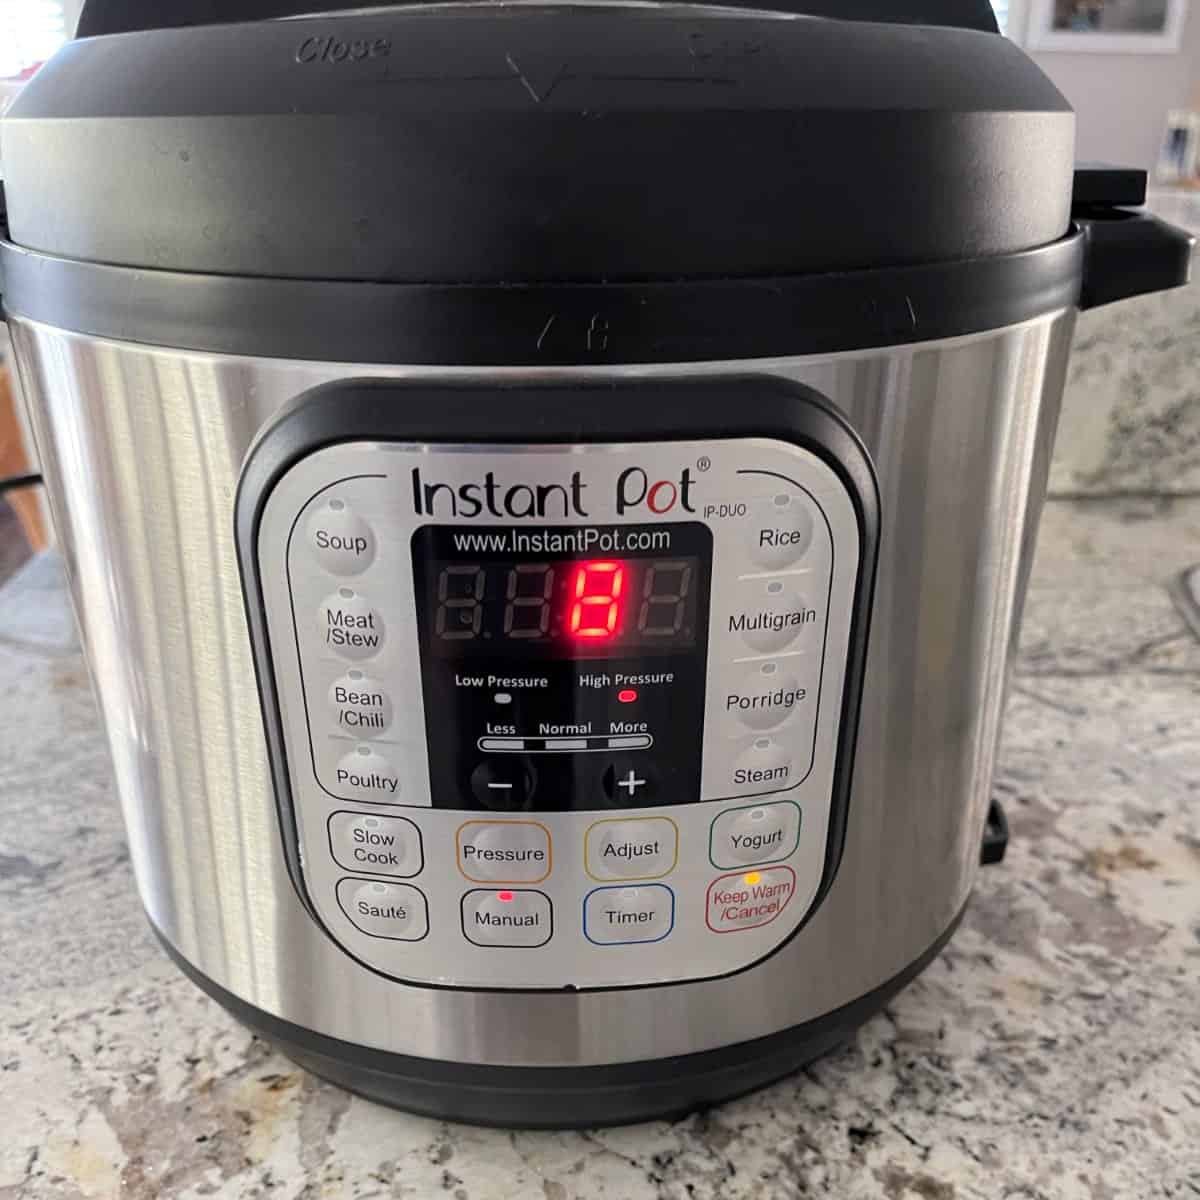 Instant Pot set to 8 minutes on High Pressure.